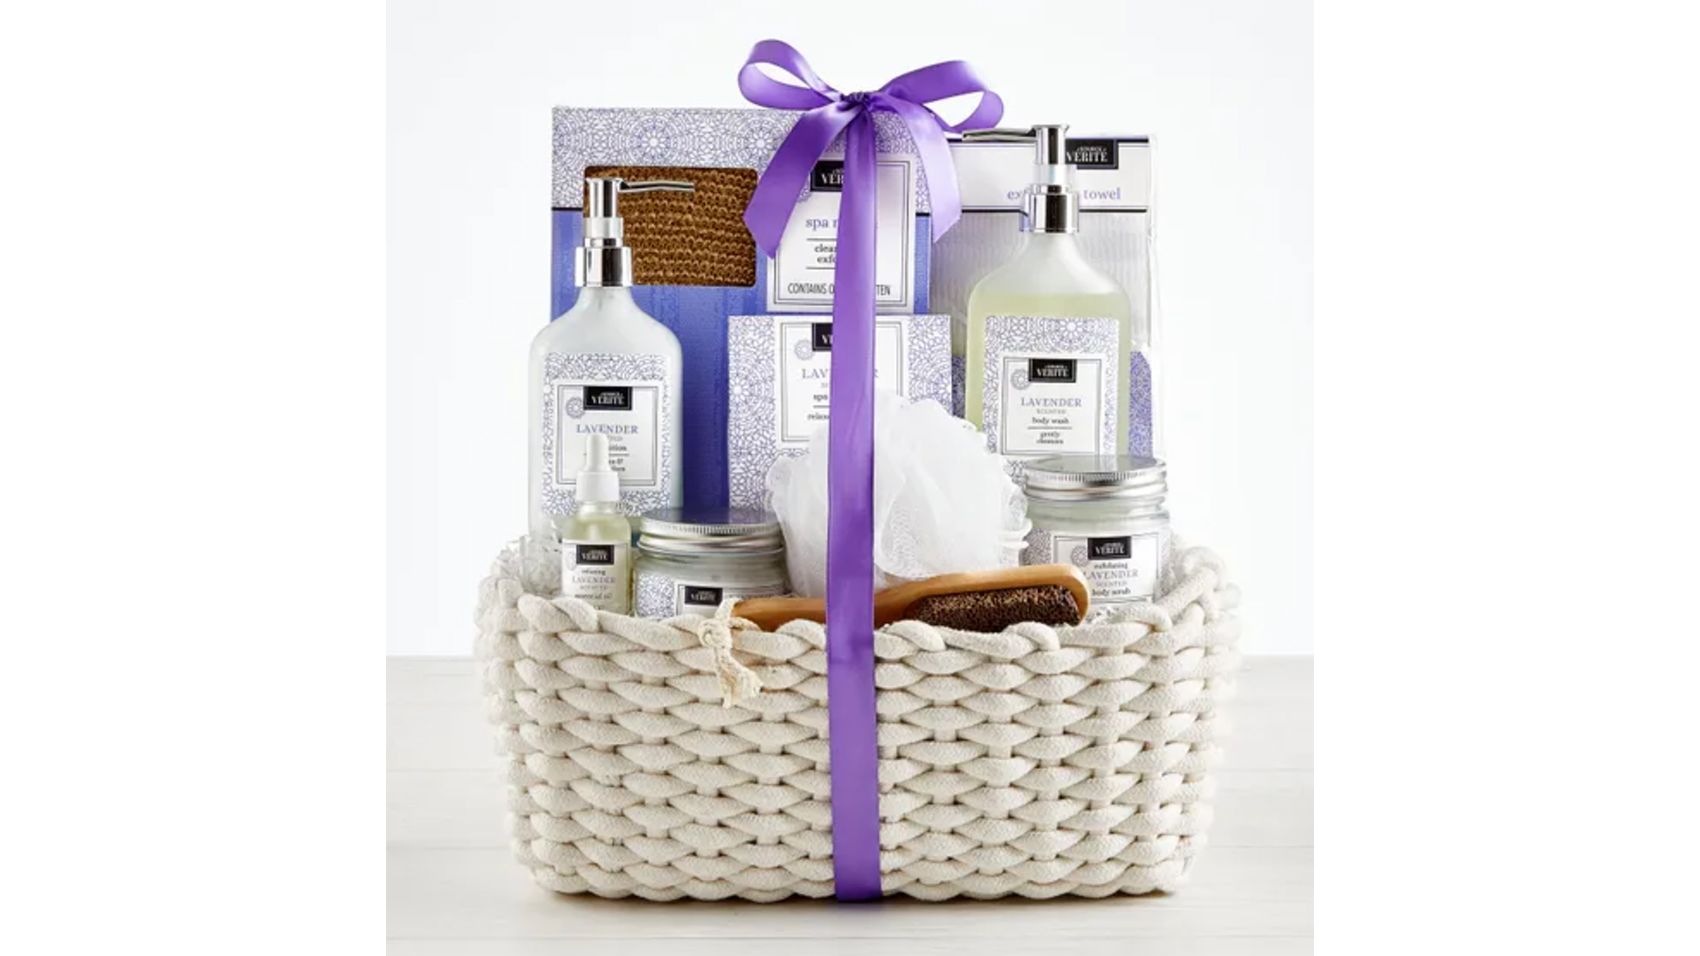 Gift Basket Ideas For New Mom – Body & Earth Inc